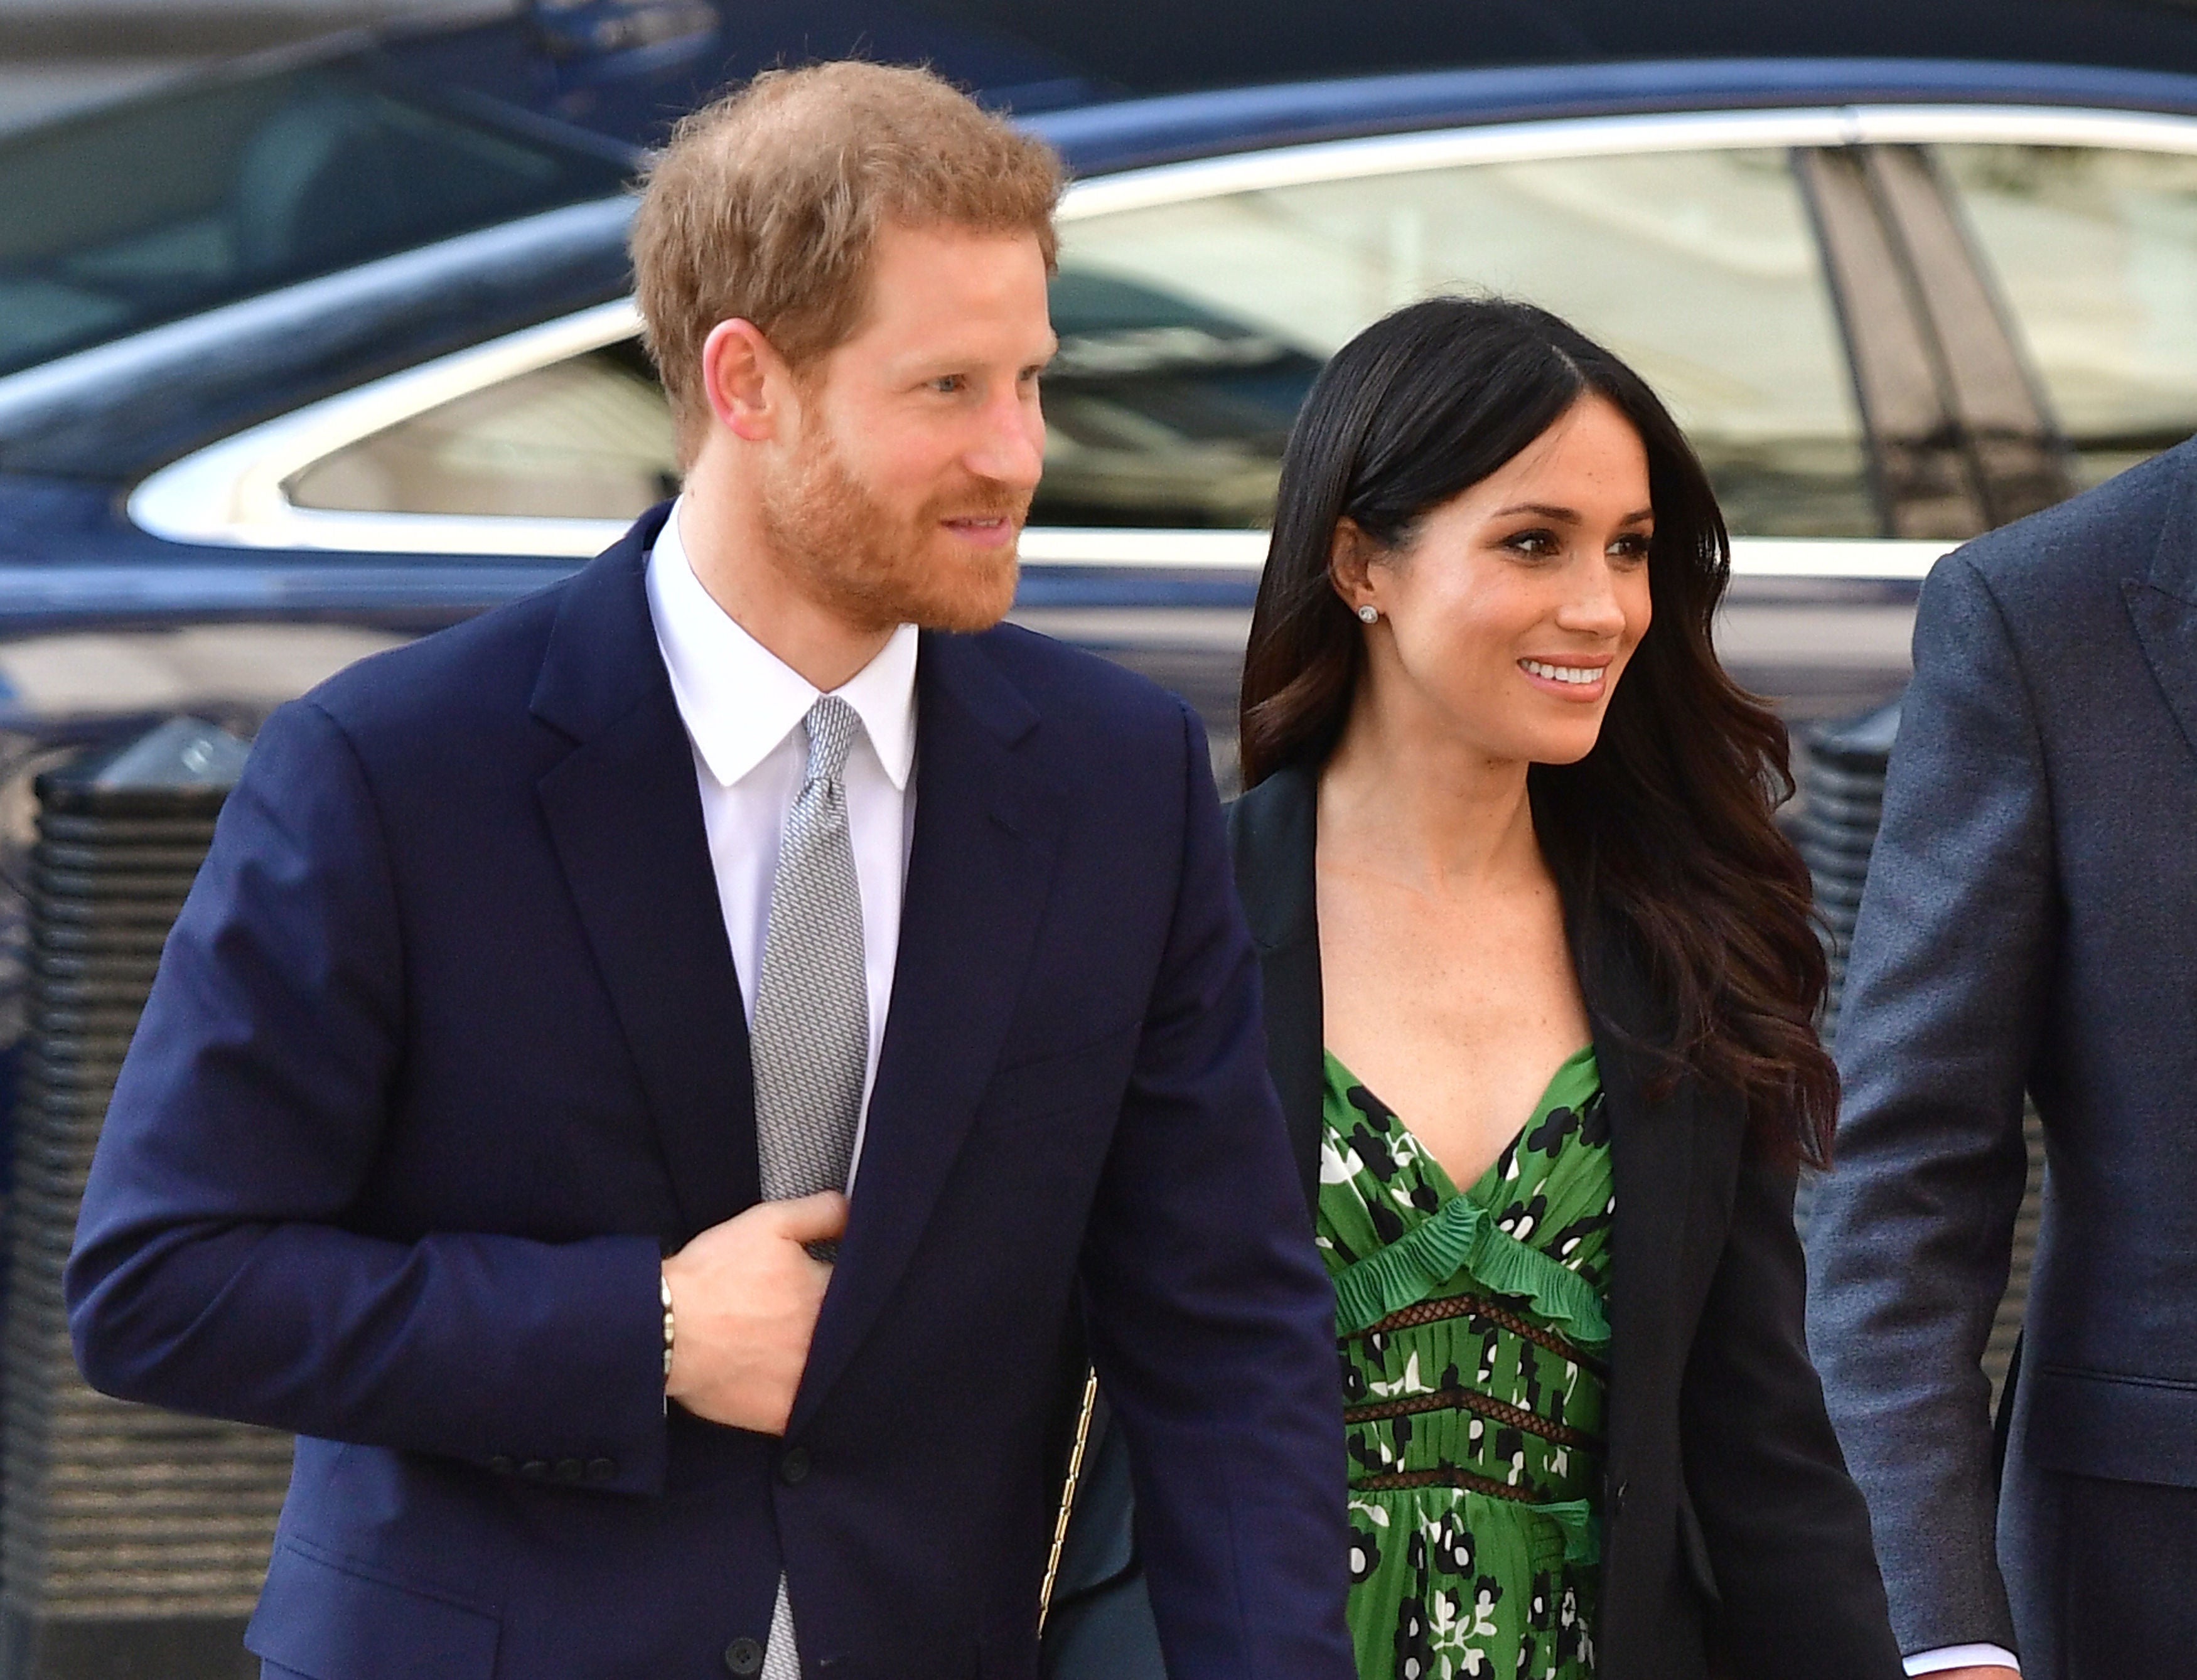 Some will warn the ruling in favour of the Duchess of Sussex marks a blow for press freedom